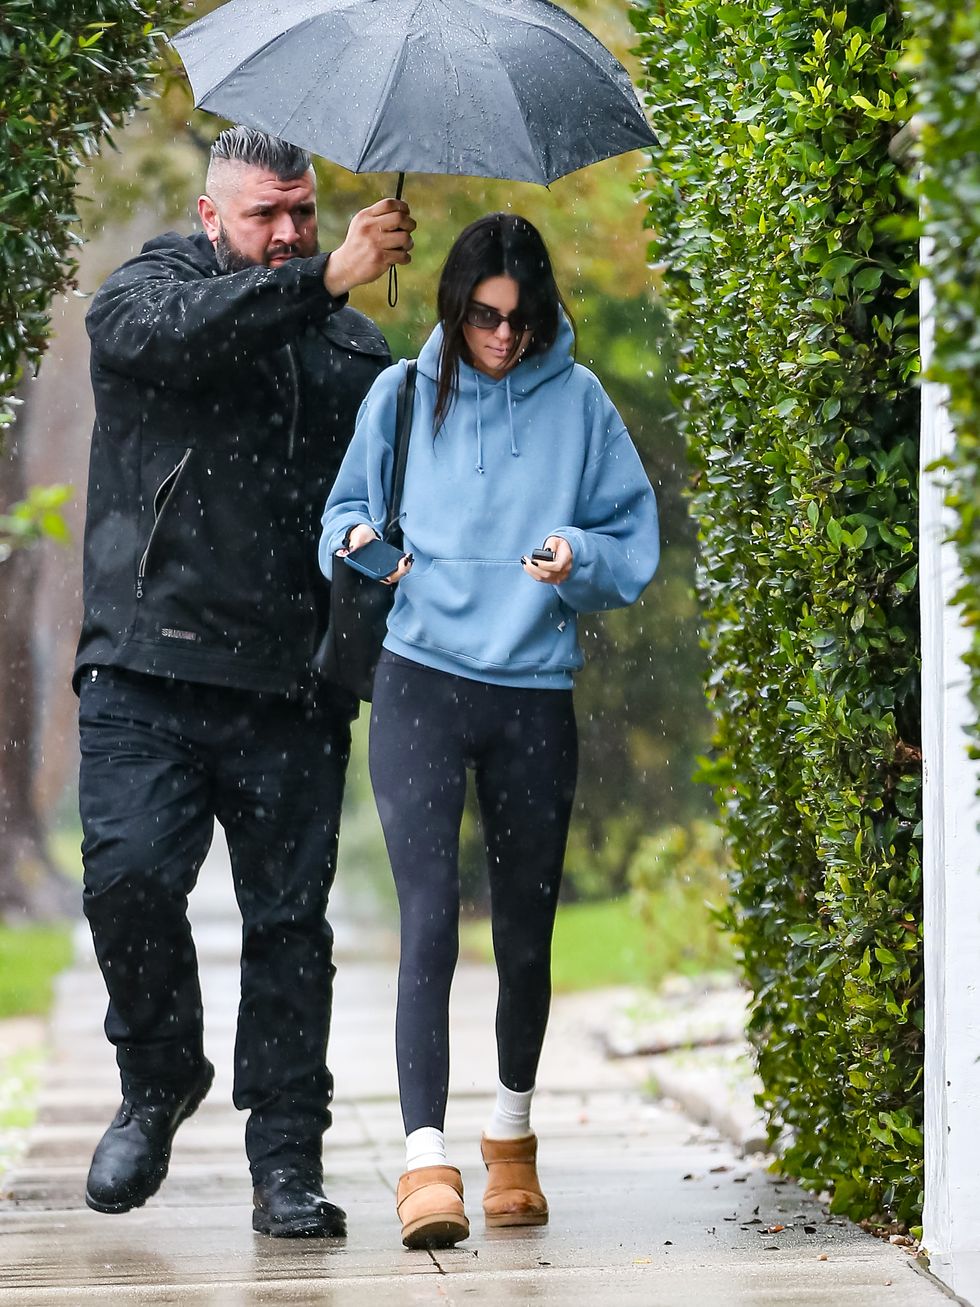 kendall jenner walks in the rain in la wearing a blue hoodie, black leggings, white socks, and ugg minis, while her bodyguard holds an umbrella over her head